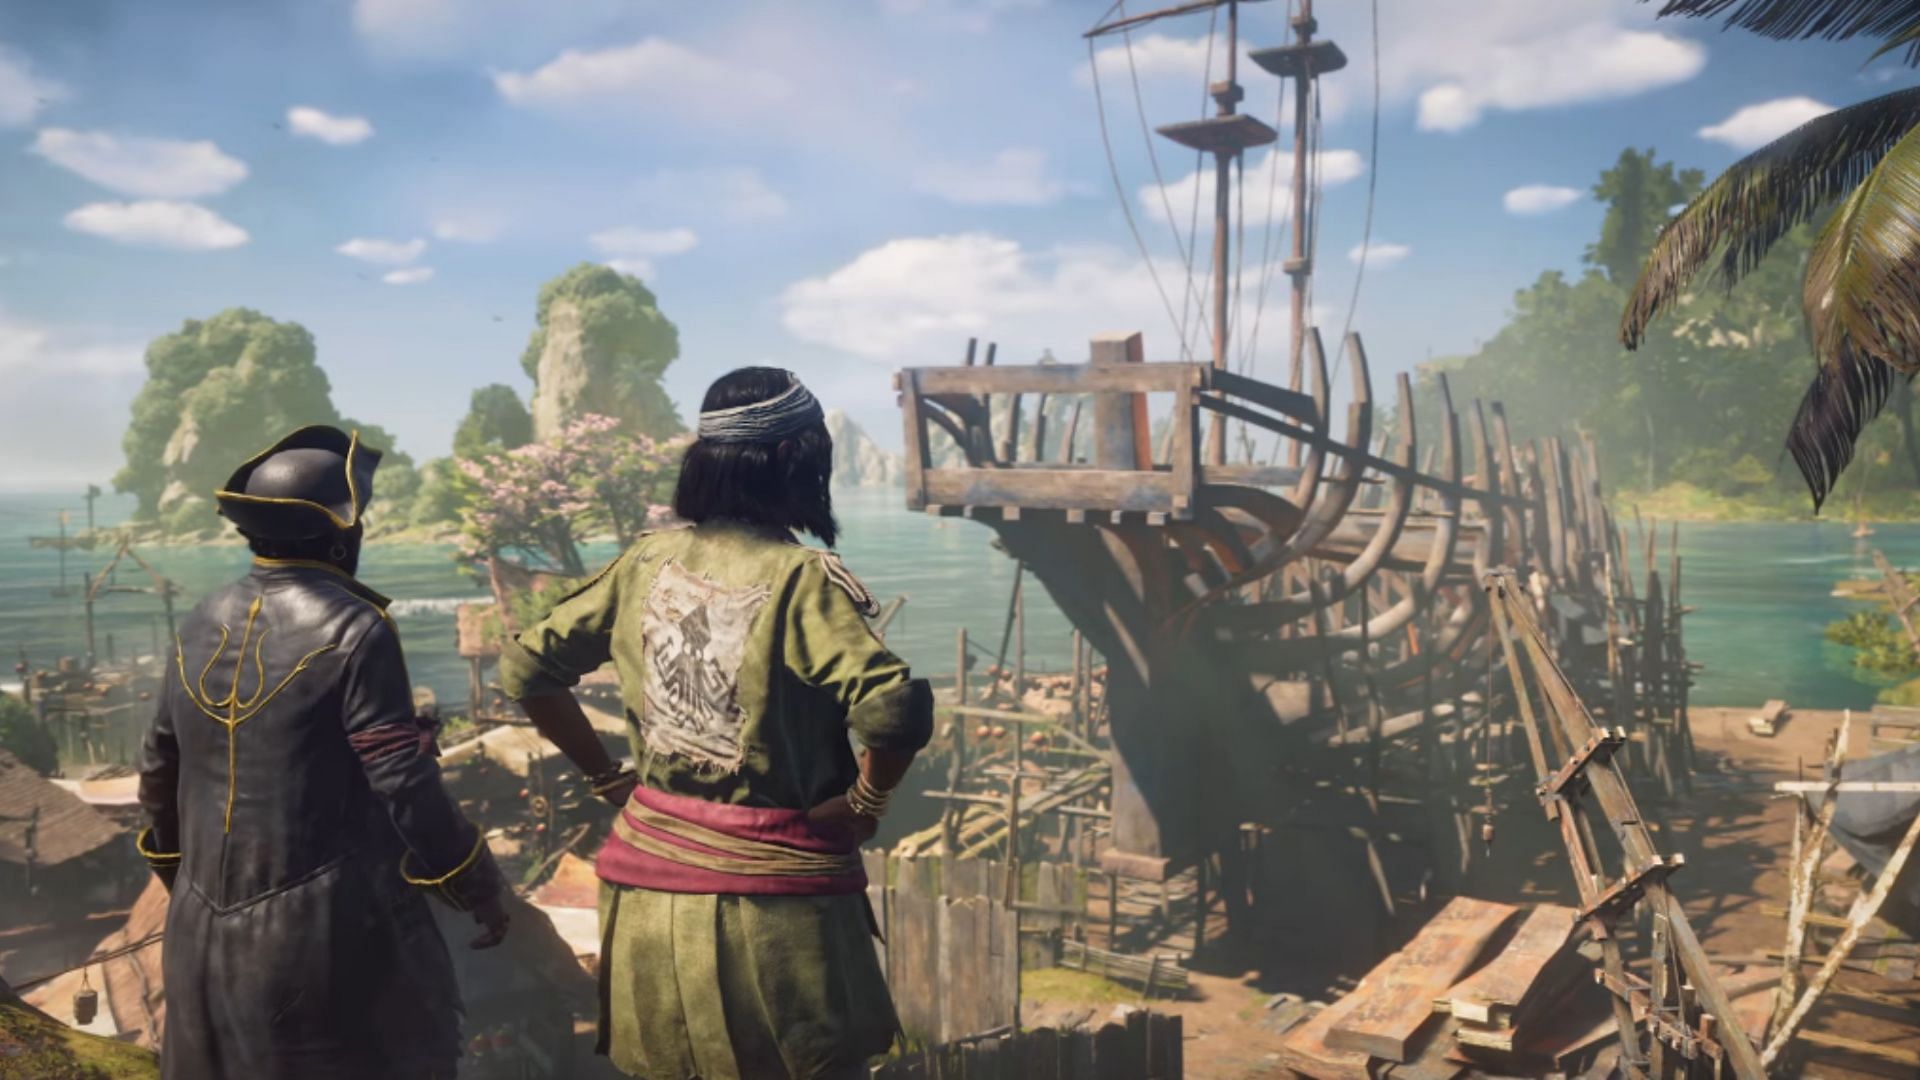 The trailer for Skull &amp; Bones was presented in a remarkable manner, accompanied by a captivating live performance of the title track &quot;Skull And Bone&quot; (Image via Ubisoft)